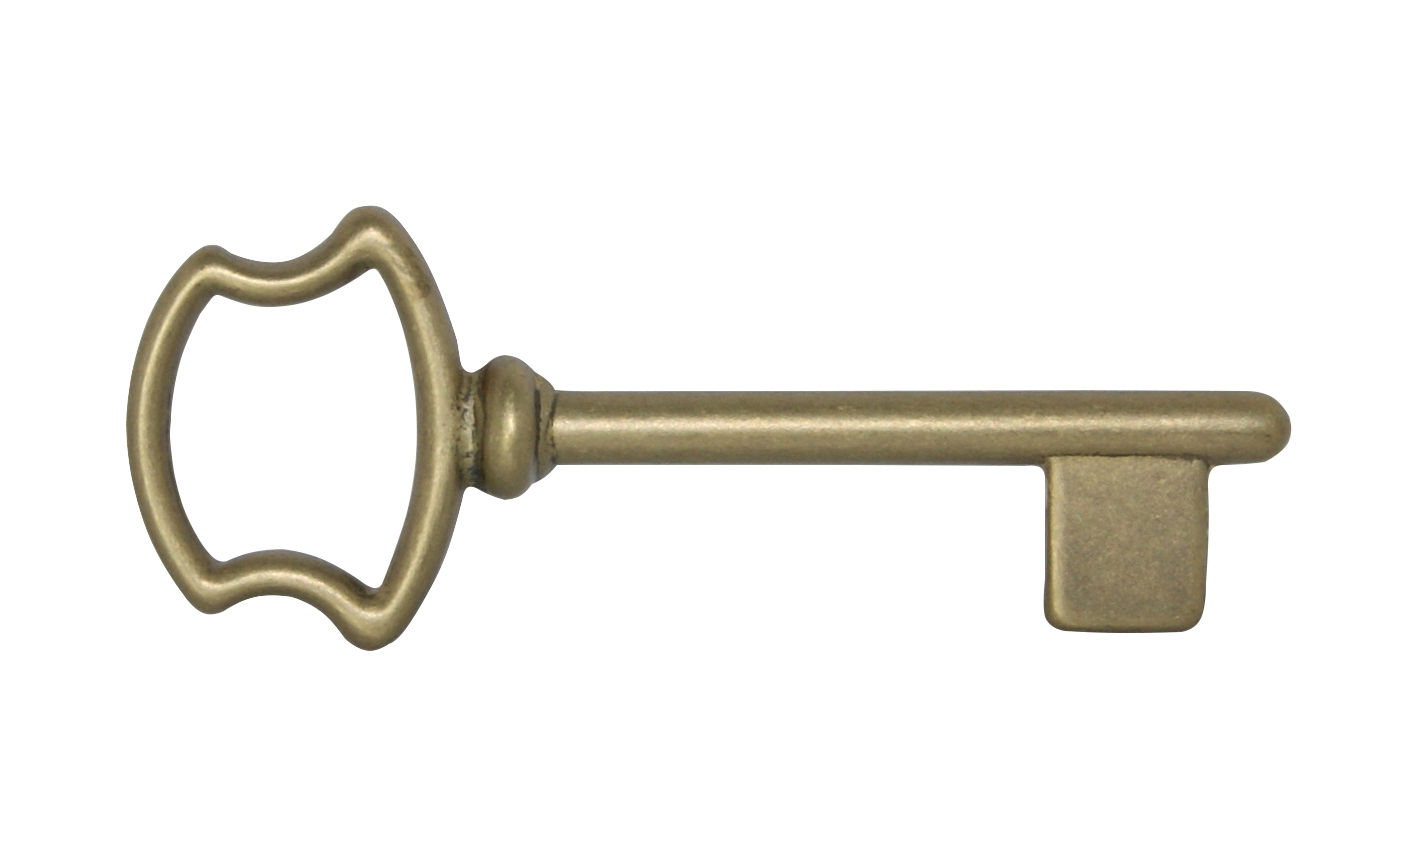 Chiave old brass